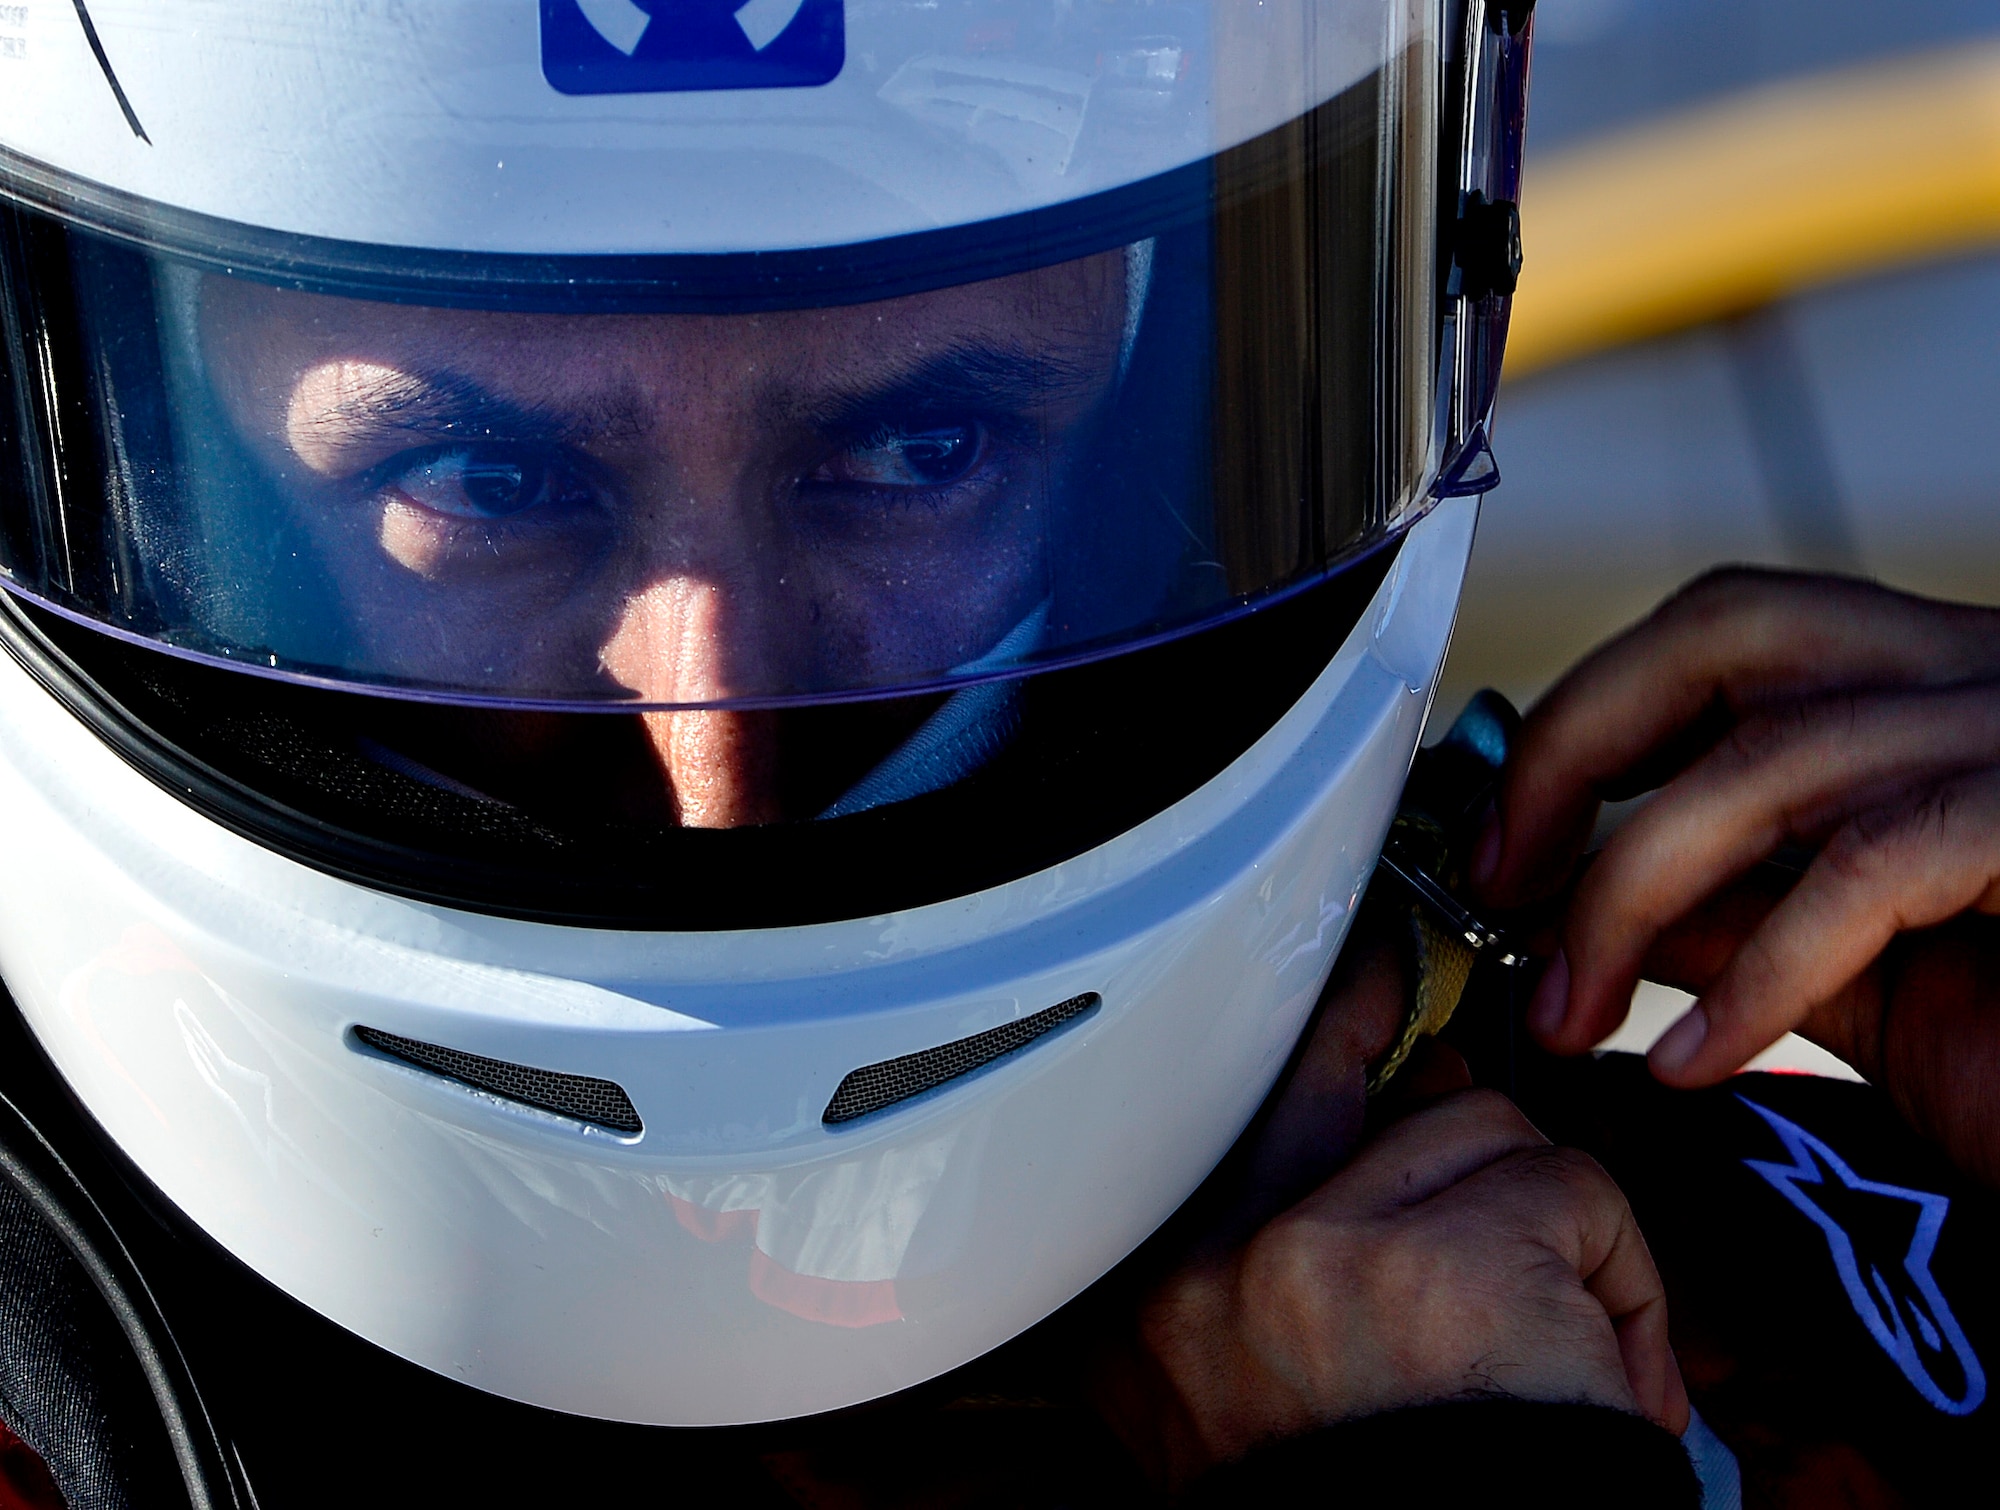 Tech. Sgt. Gabriel, 432nd Wing/432nd Air Expeditionary Wing MQ-9 Reaper sensor operator, puts his helmet on before racing his Mitsubishi Lancer Evolution at the Spring Mountain Raceway Nov. 1, 2015, in Pahrump, Nevada. Gabriel balances his life between a highly stressful, yet rewarding career, with his passion for cars and racing. (U.S. Air Force photo by Airman 1st Class Christian Clausen/Released)